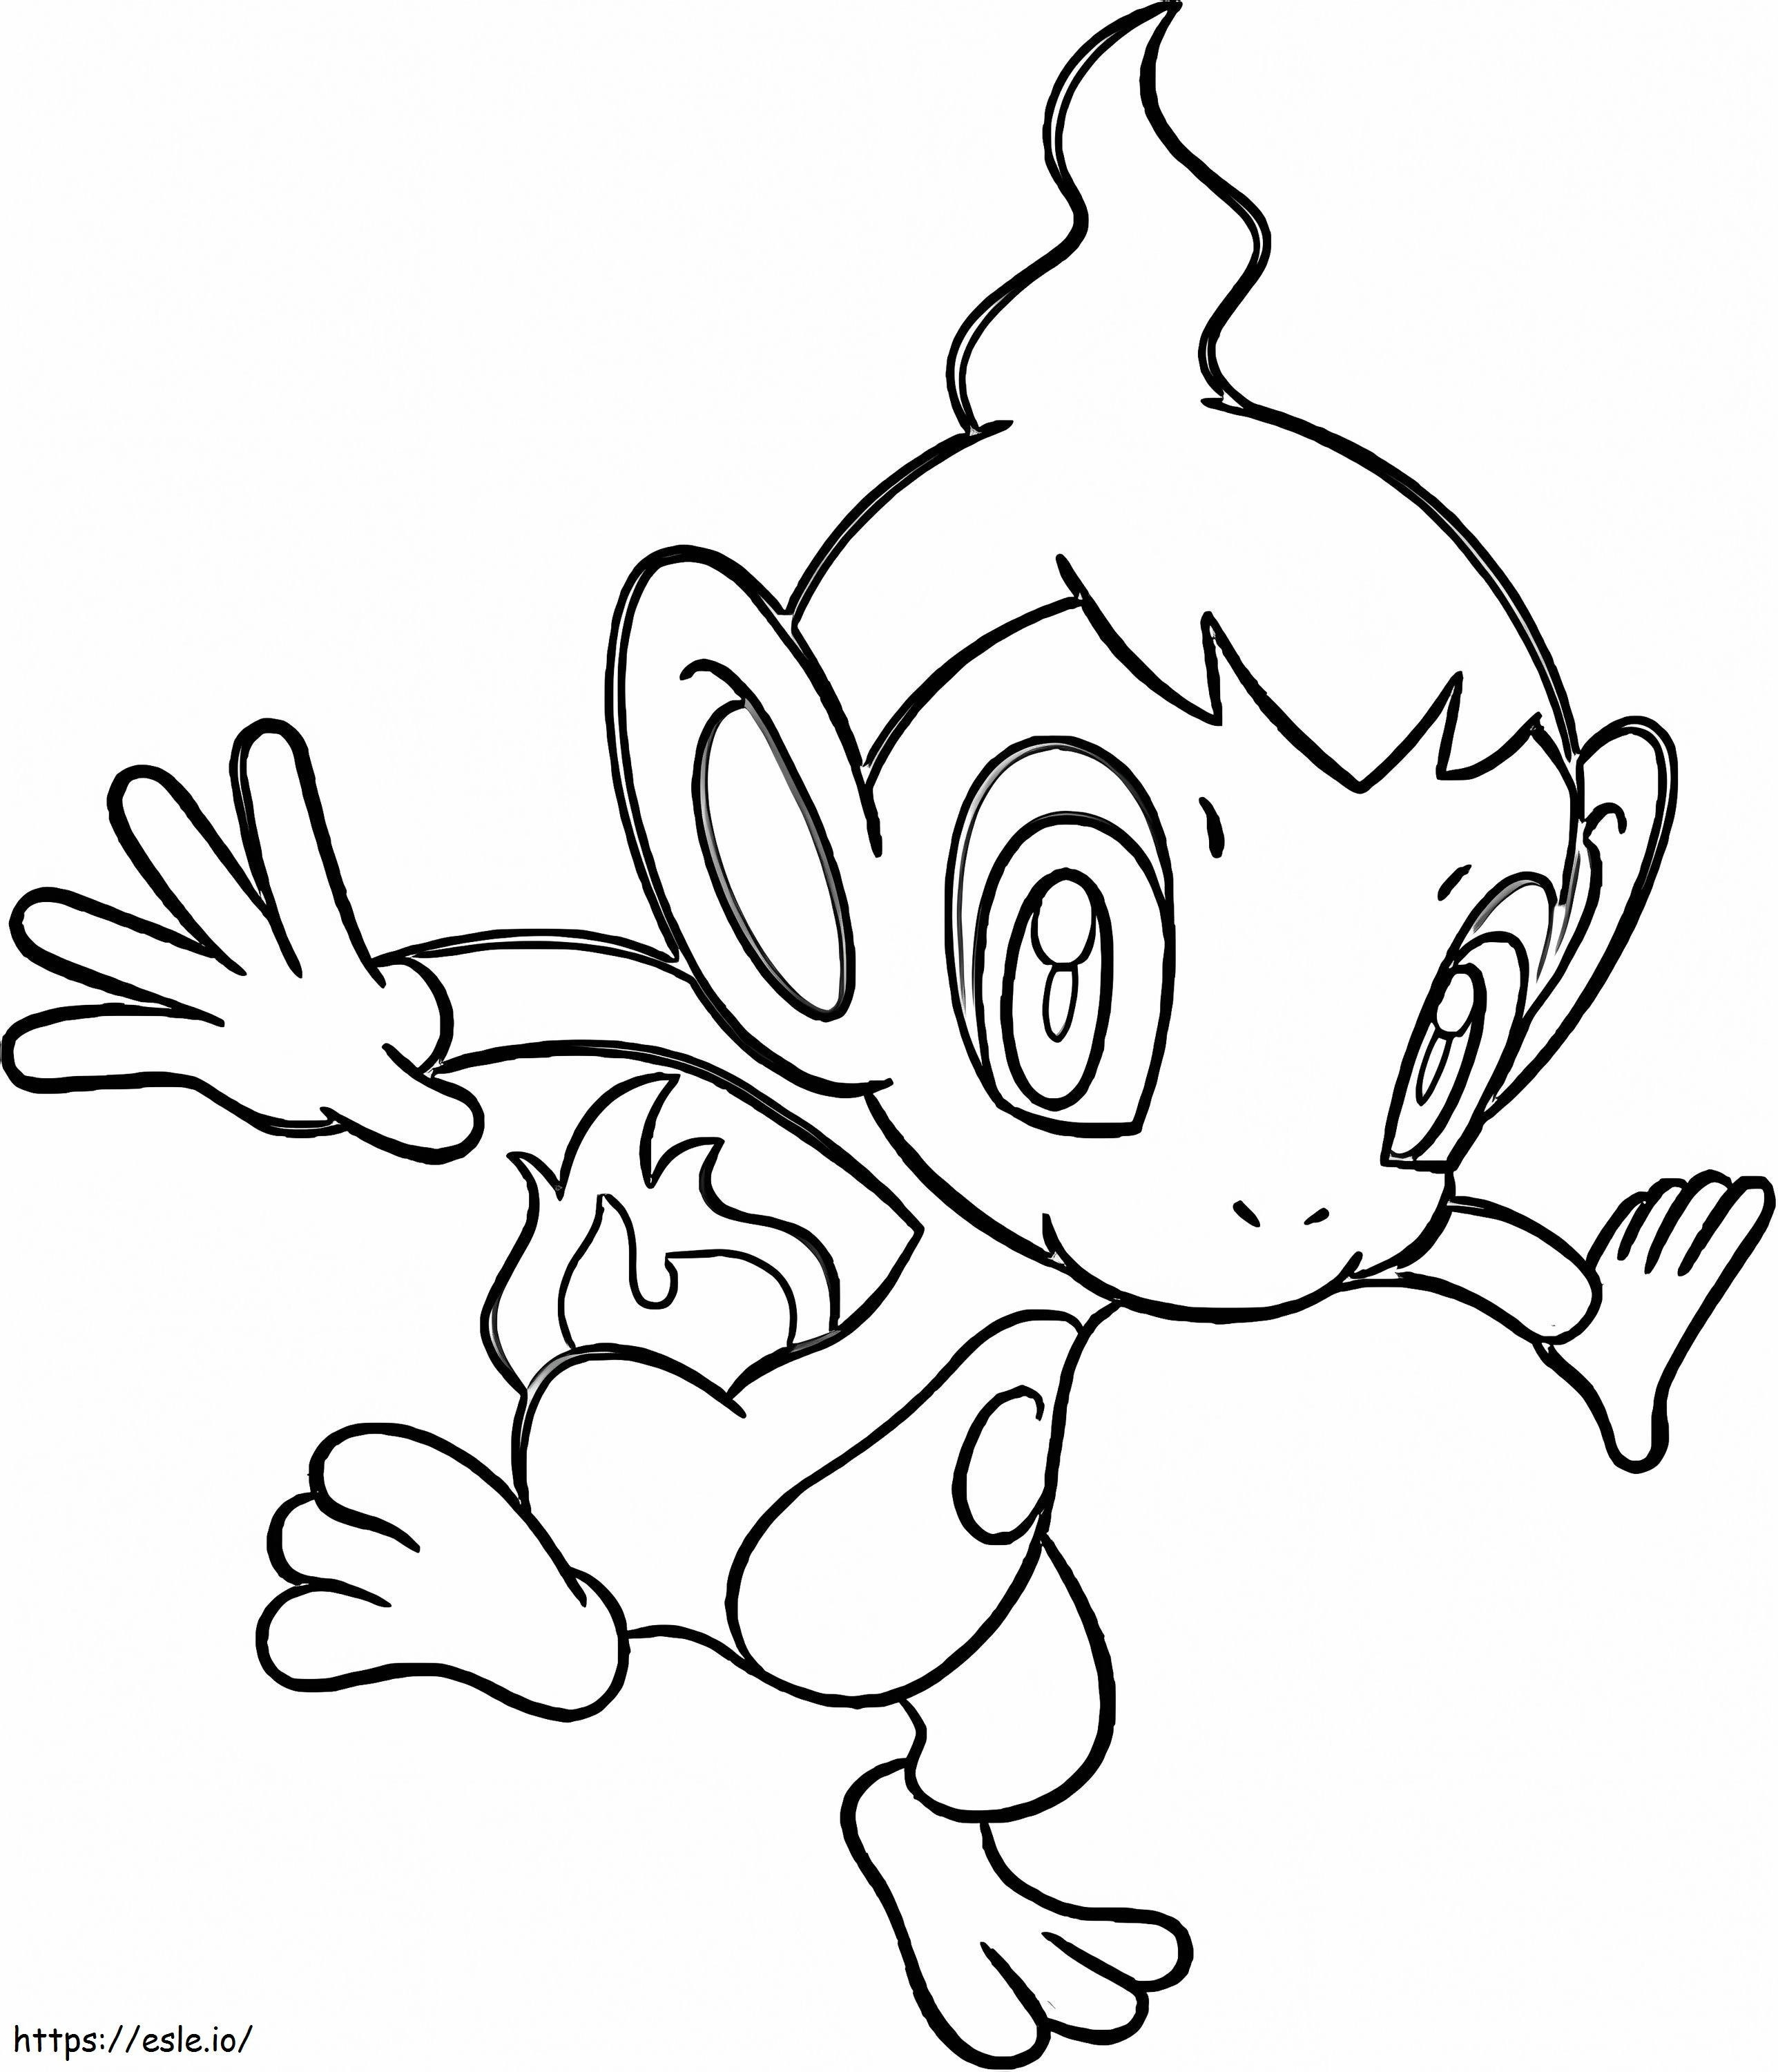 Chimchar 3 coloring page